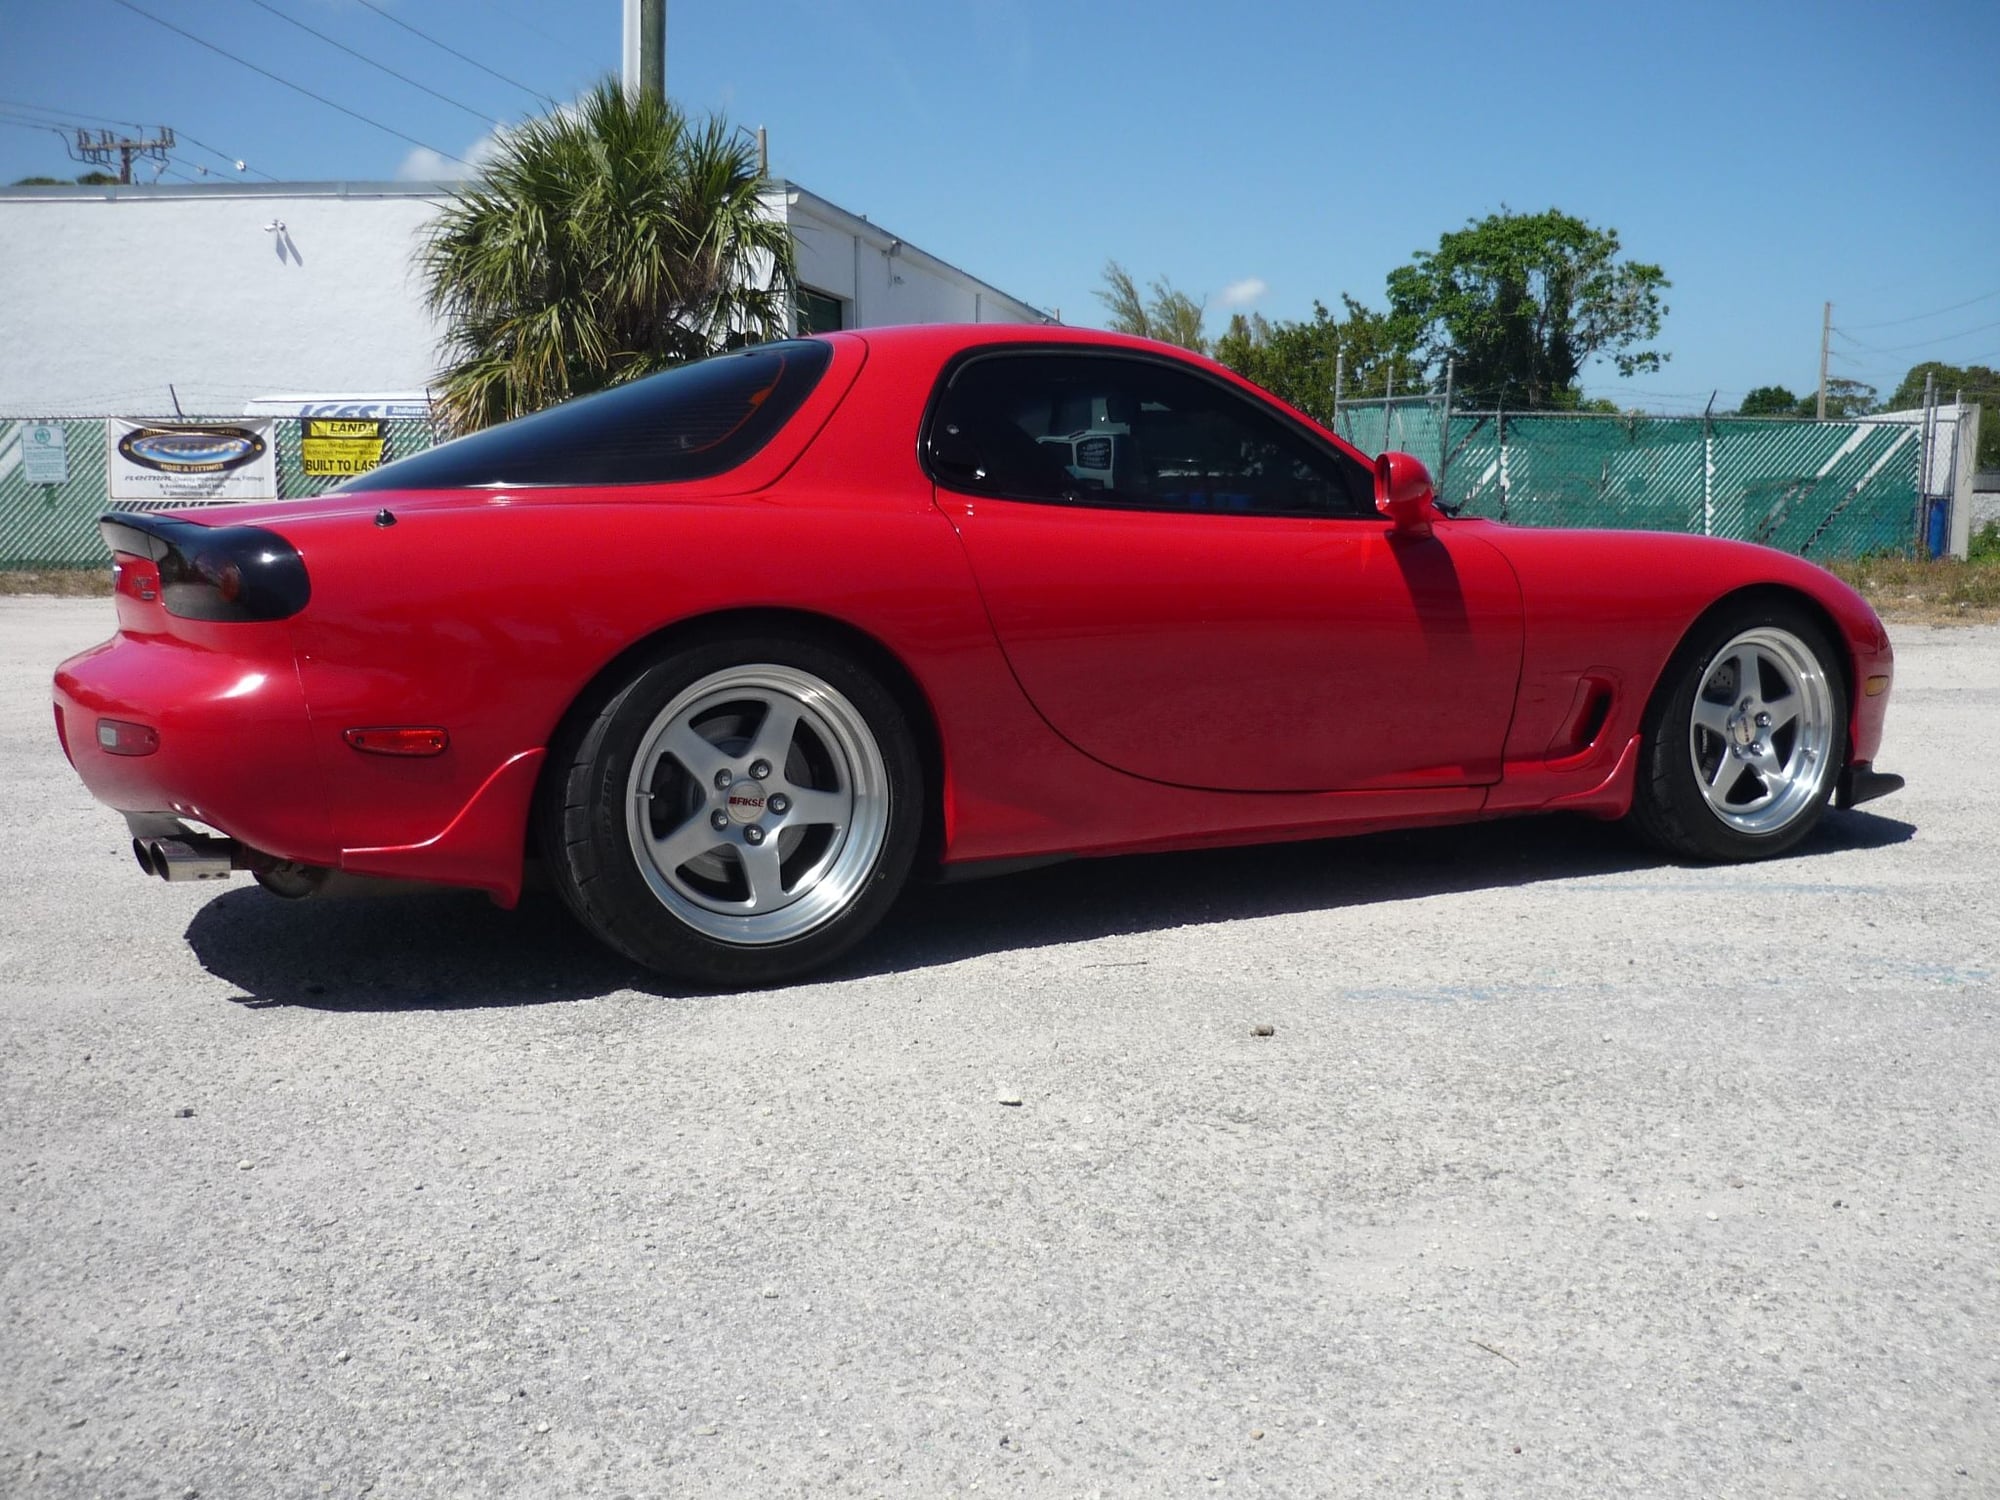 Wheels and Tires/Axles - WTB Fikse wheels or CCW wheels 17s or 18s - Used - 0  All Models - Ft Lauderdale, FL 33308, United States